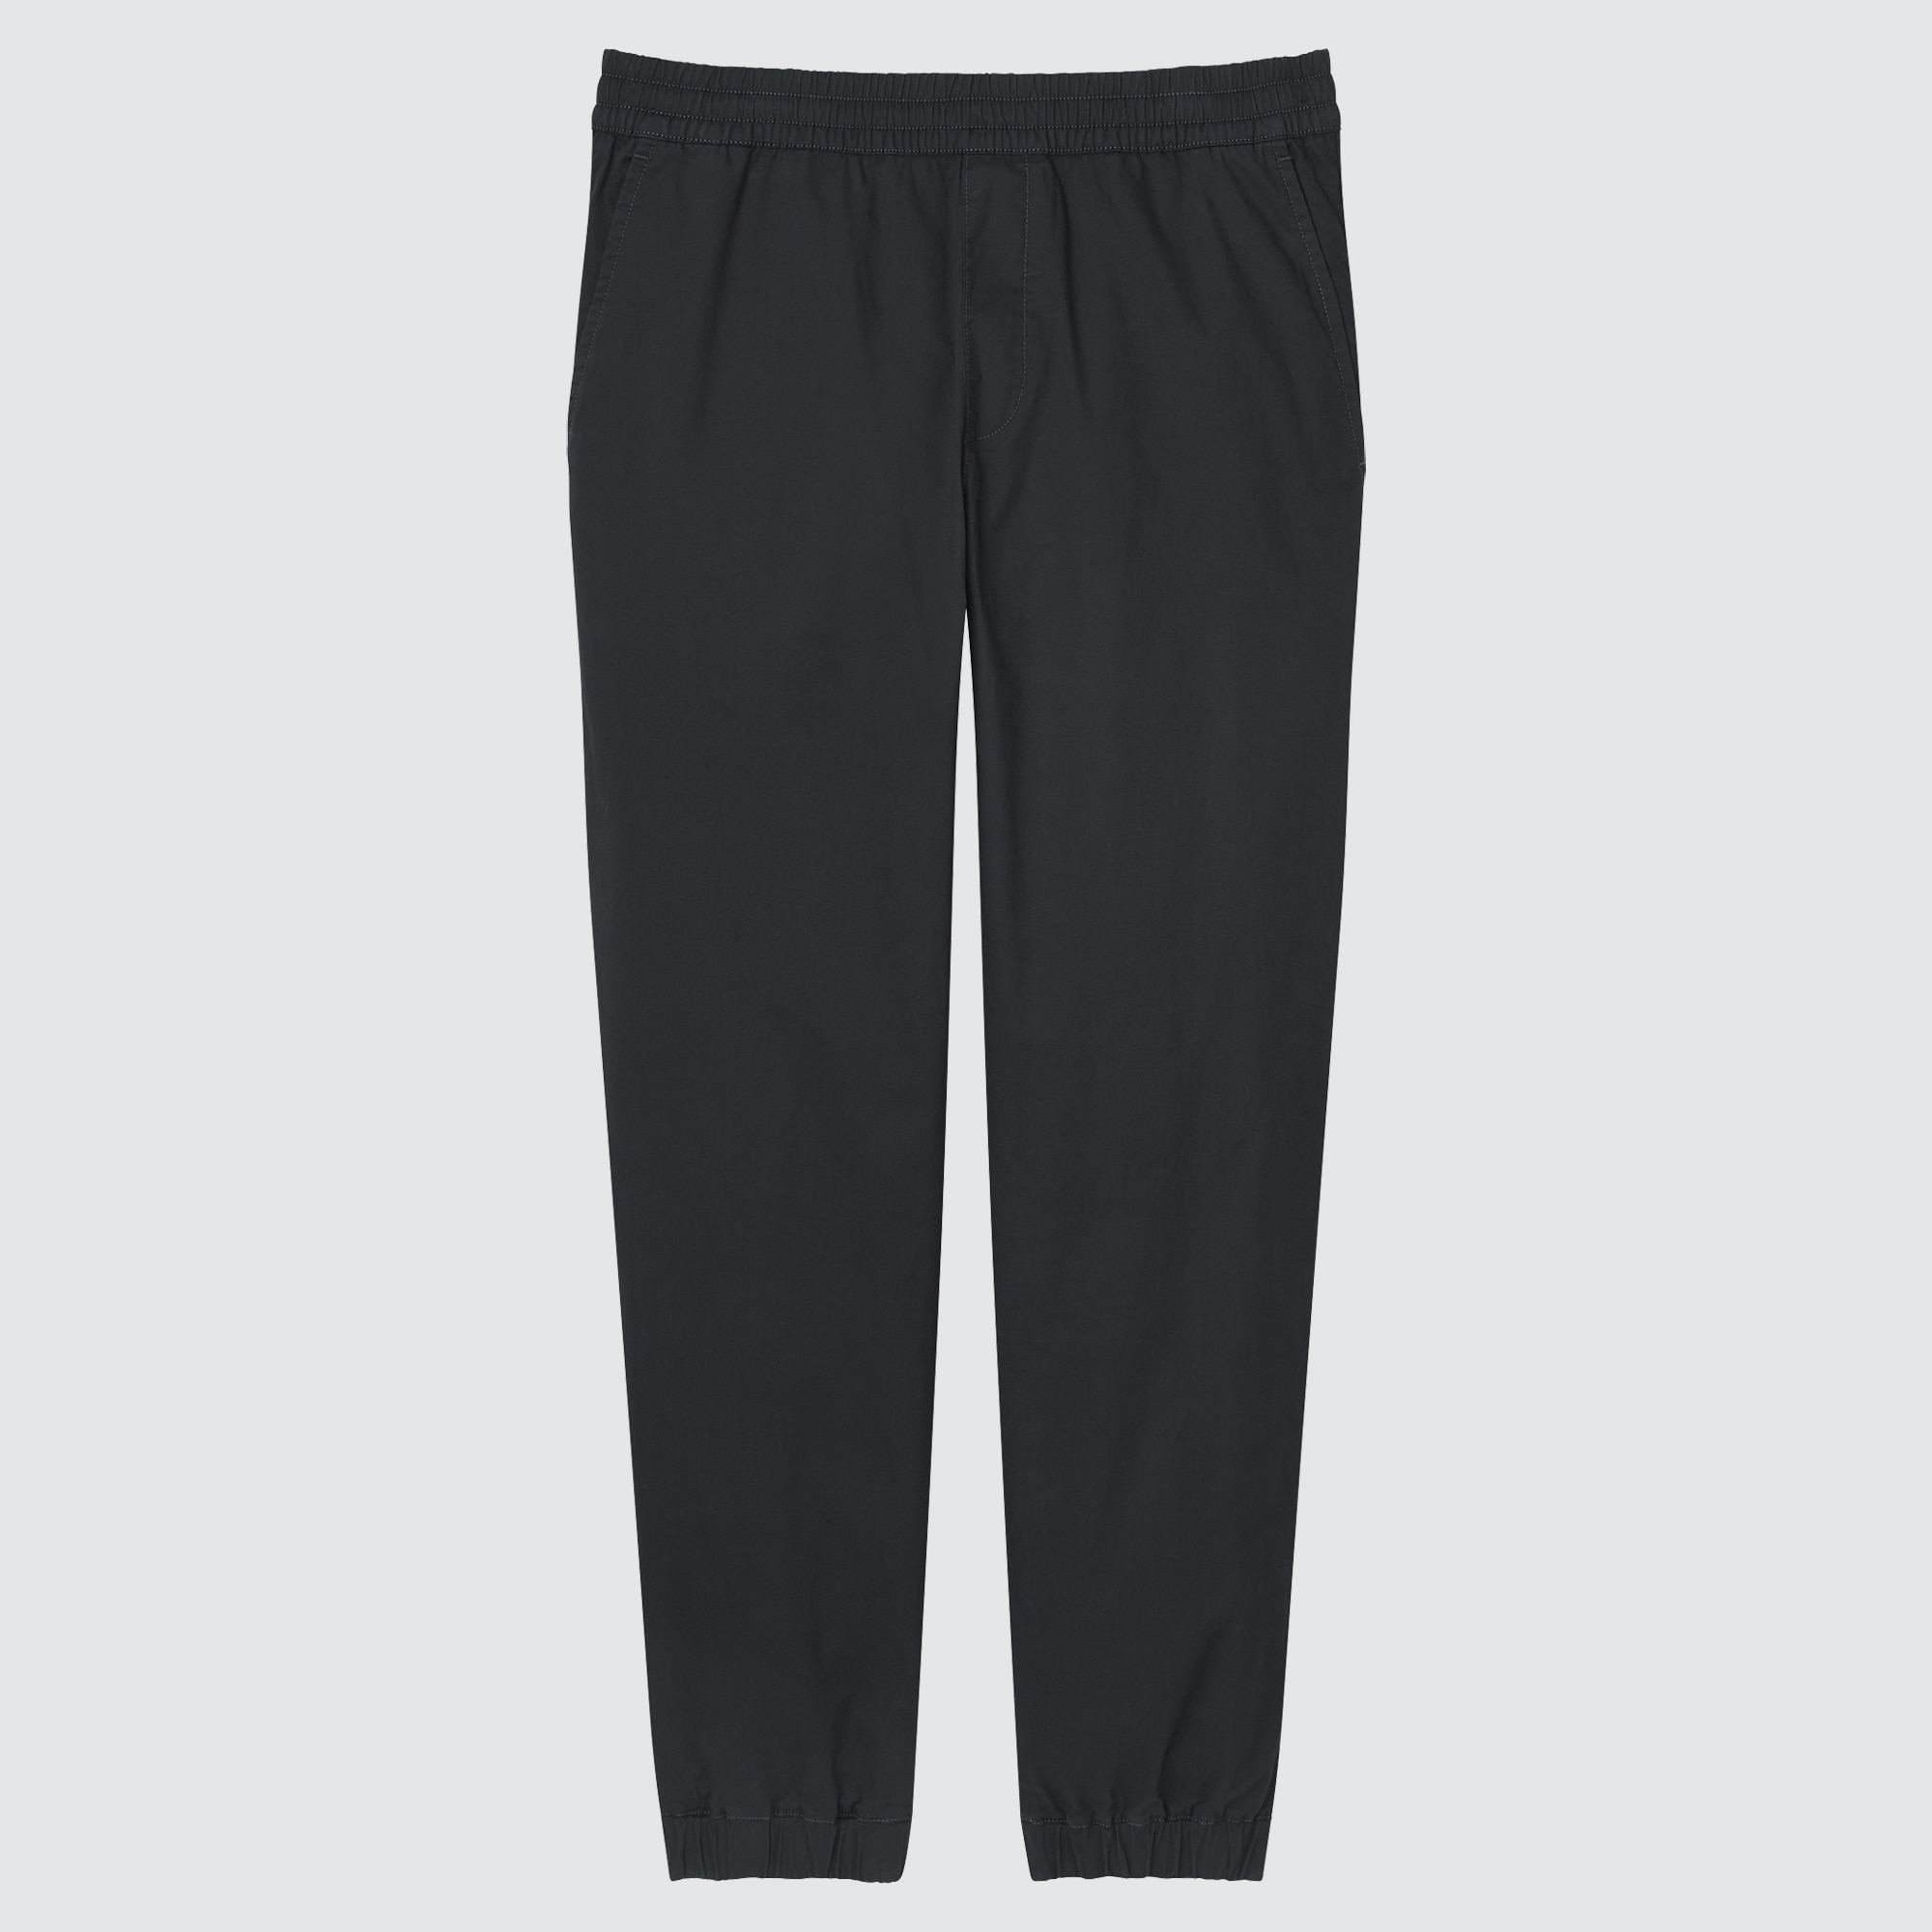 UNIQLO Jogger Pants Women Small Solid Black Tapered 24x27 Casual Drawstrings